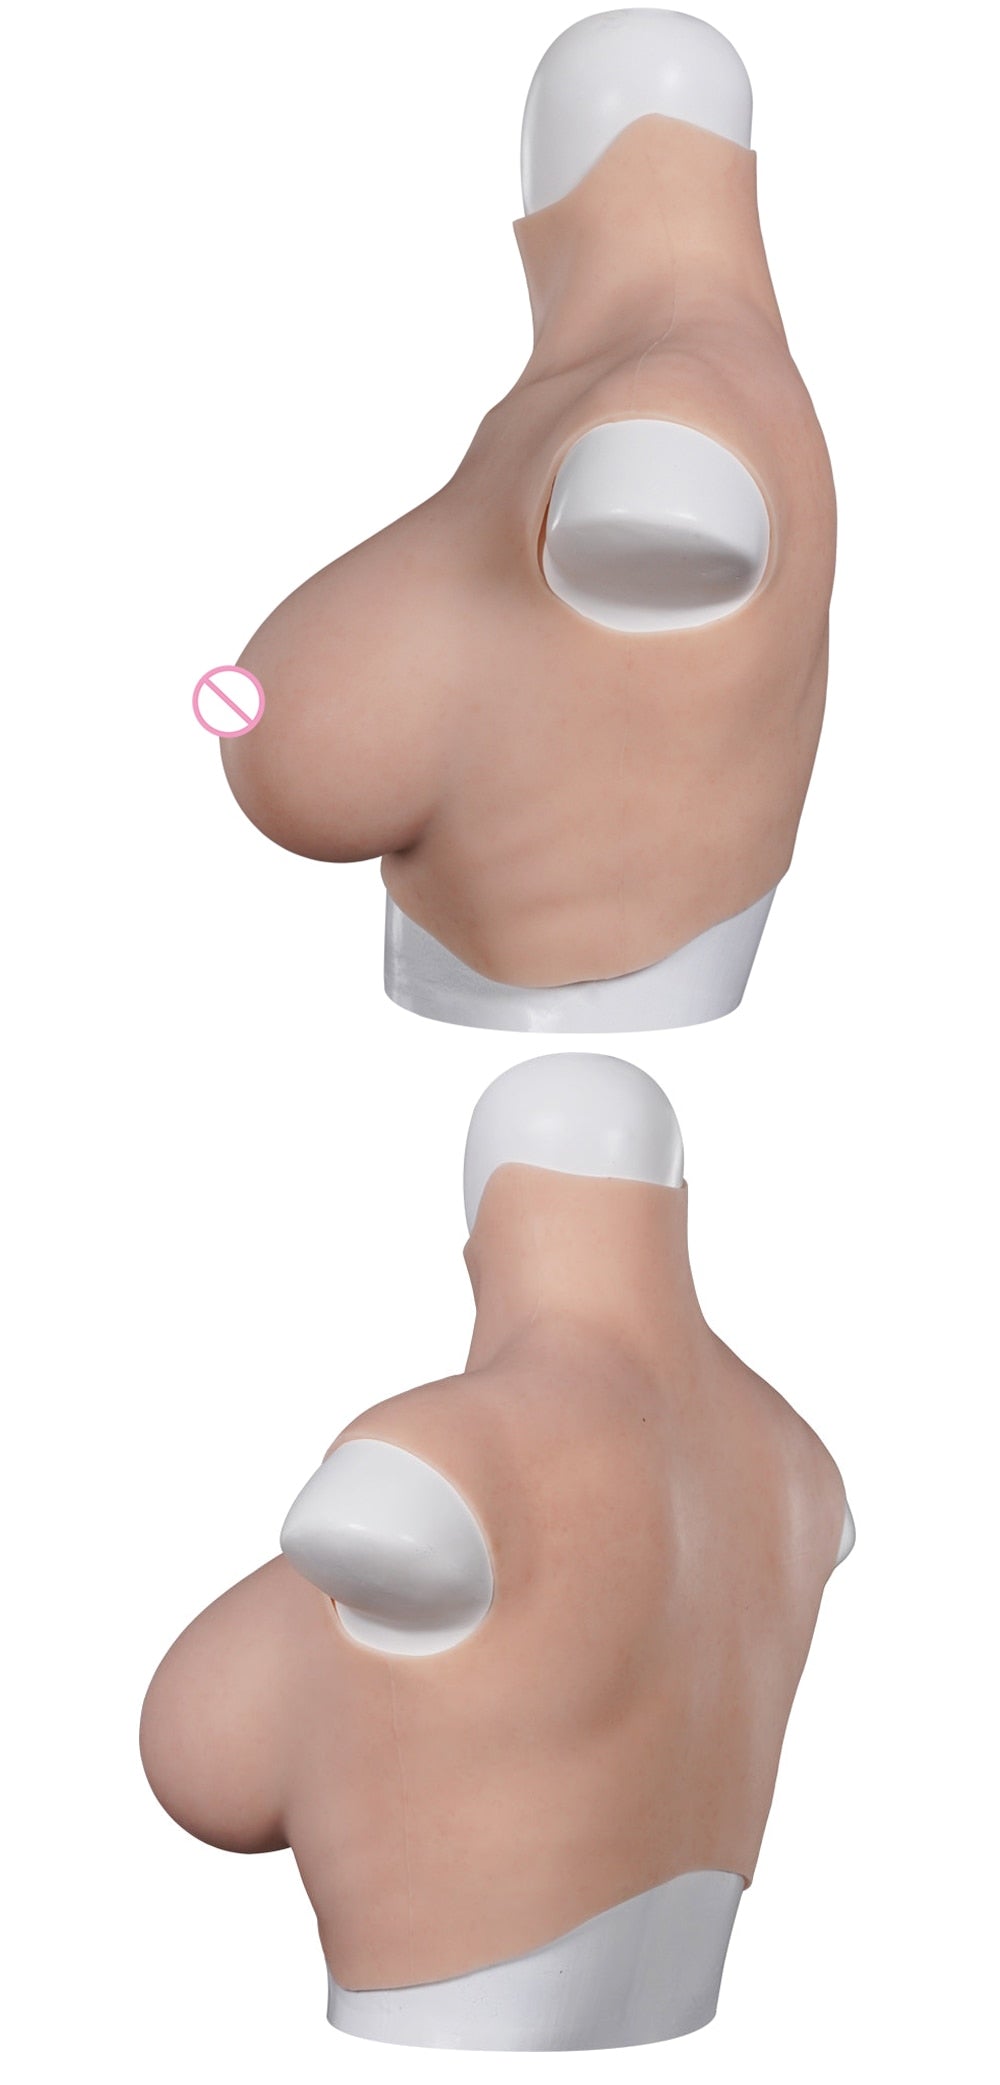 Silicone Breastplate G ccup side and back view (nipples covered)